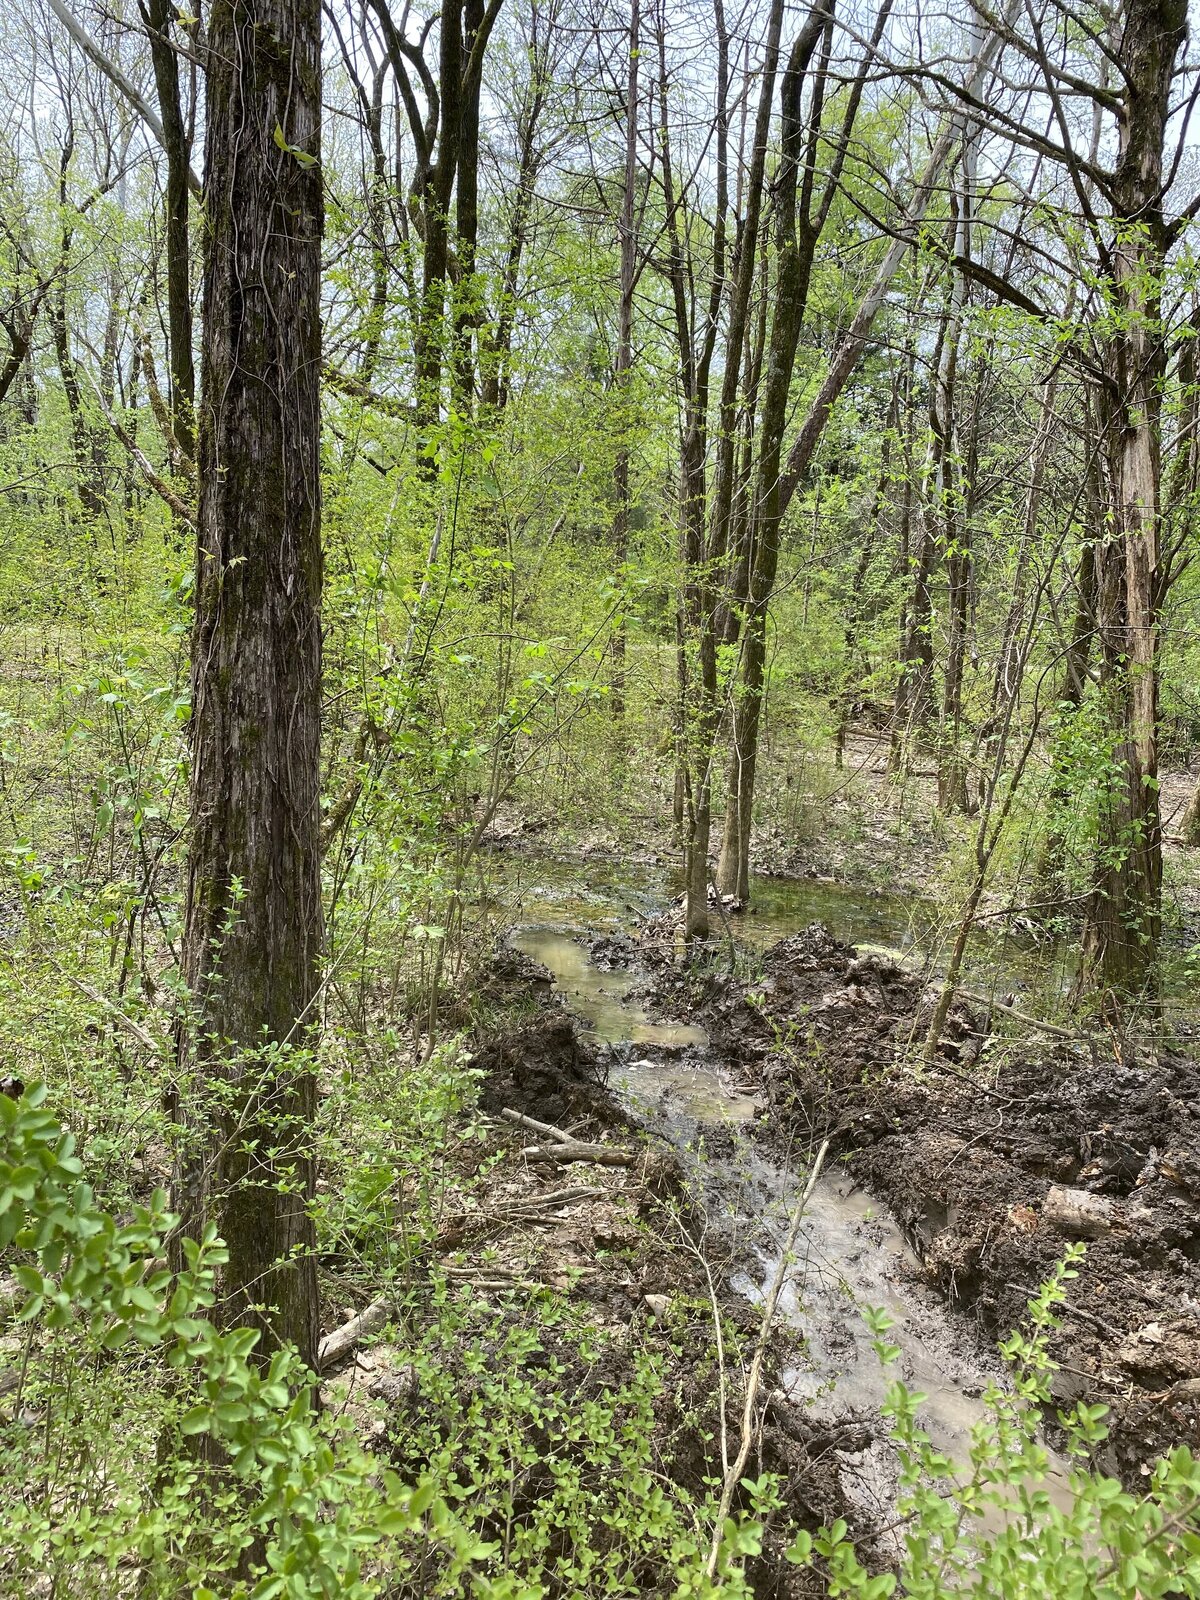 stream-flowing-through-wooded-area